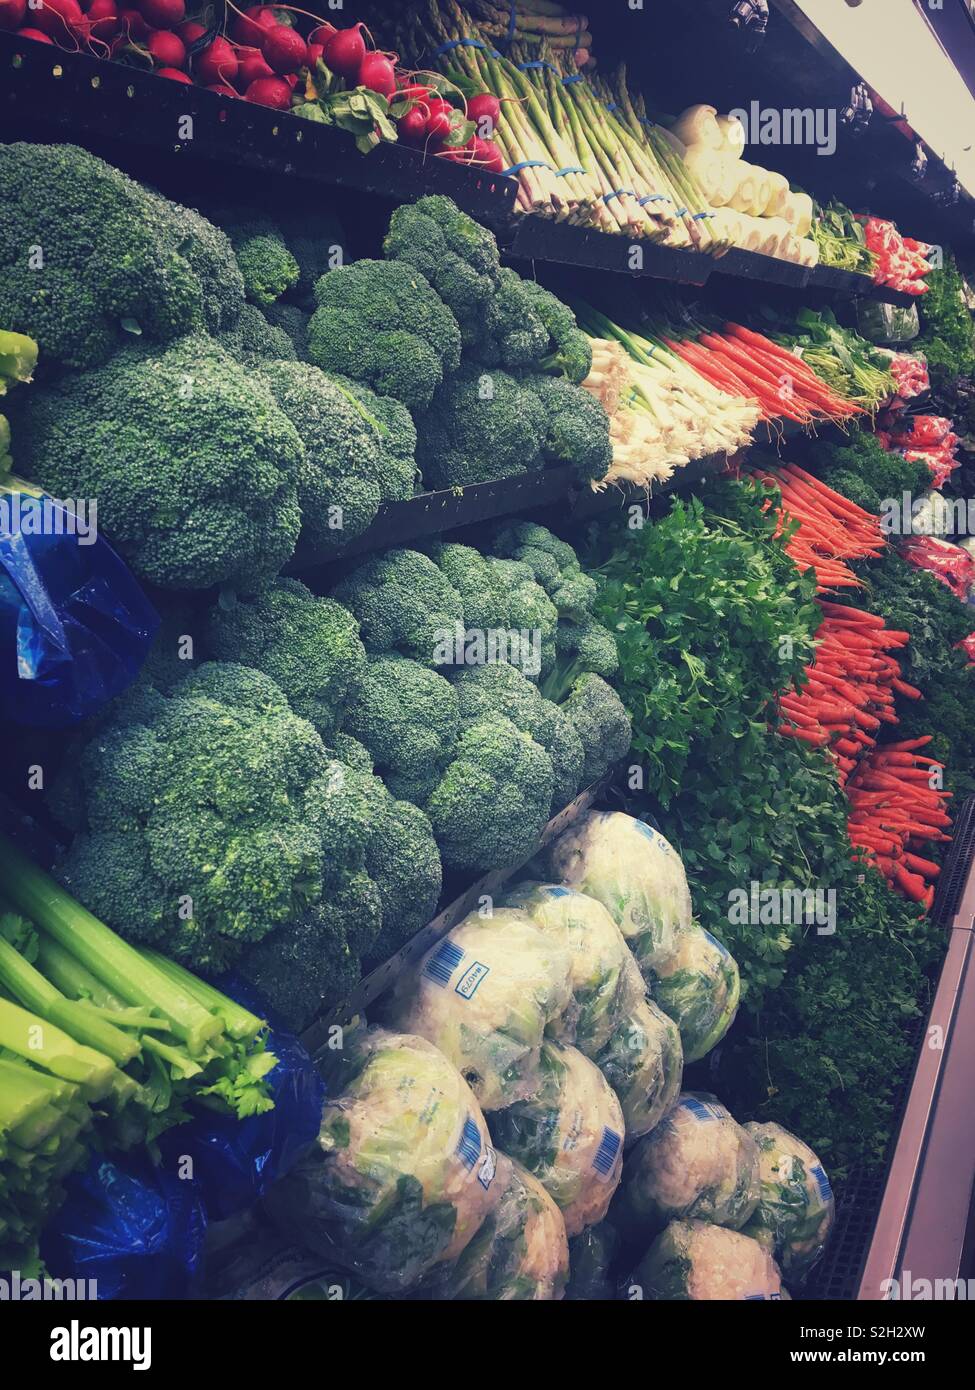 Vegetables on shelves at a produce isle at a grocery store. Stock Photo